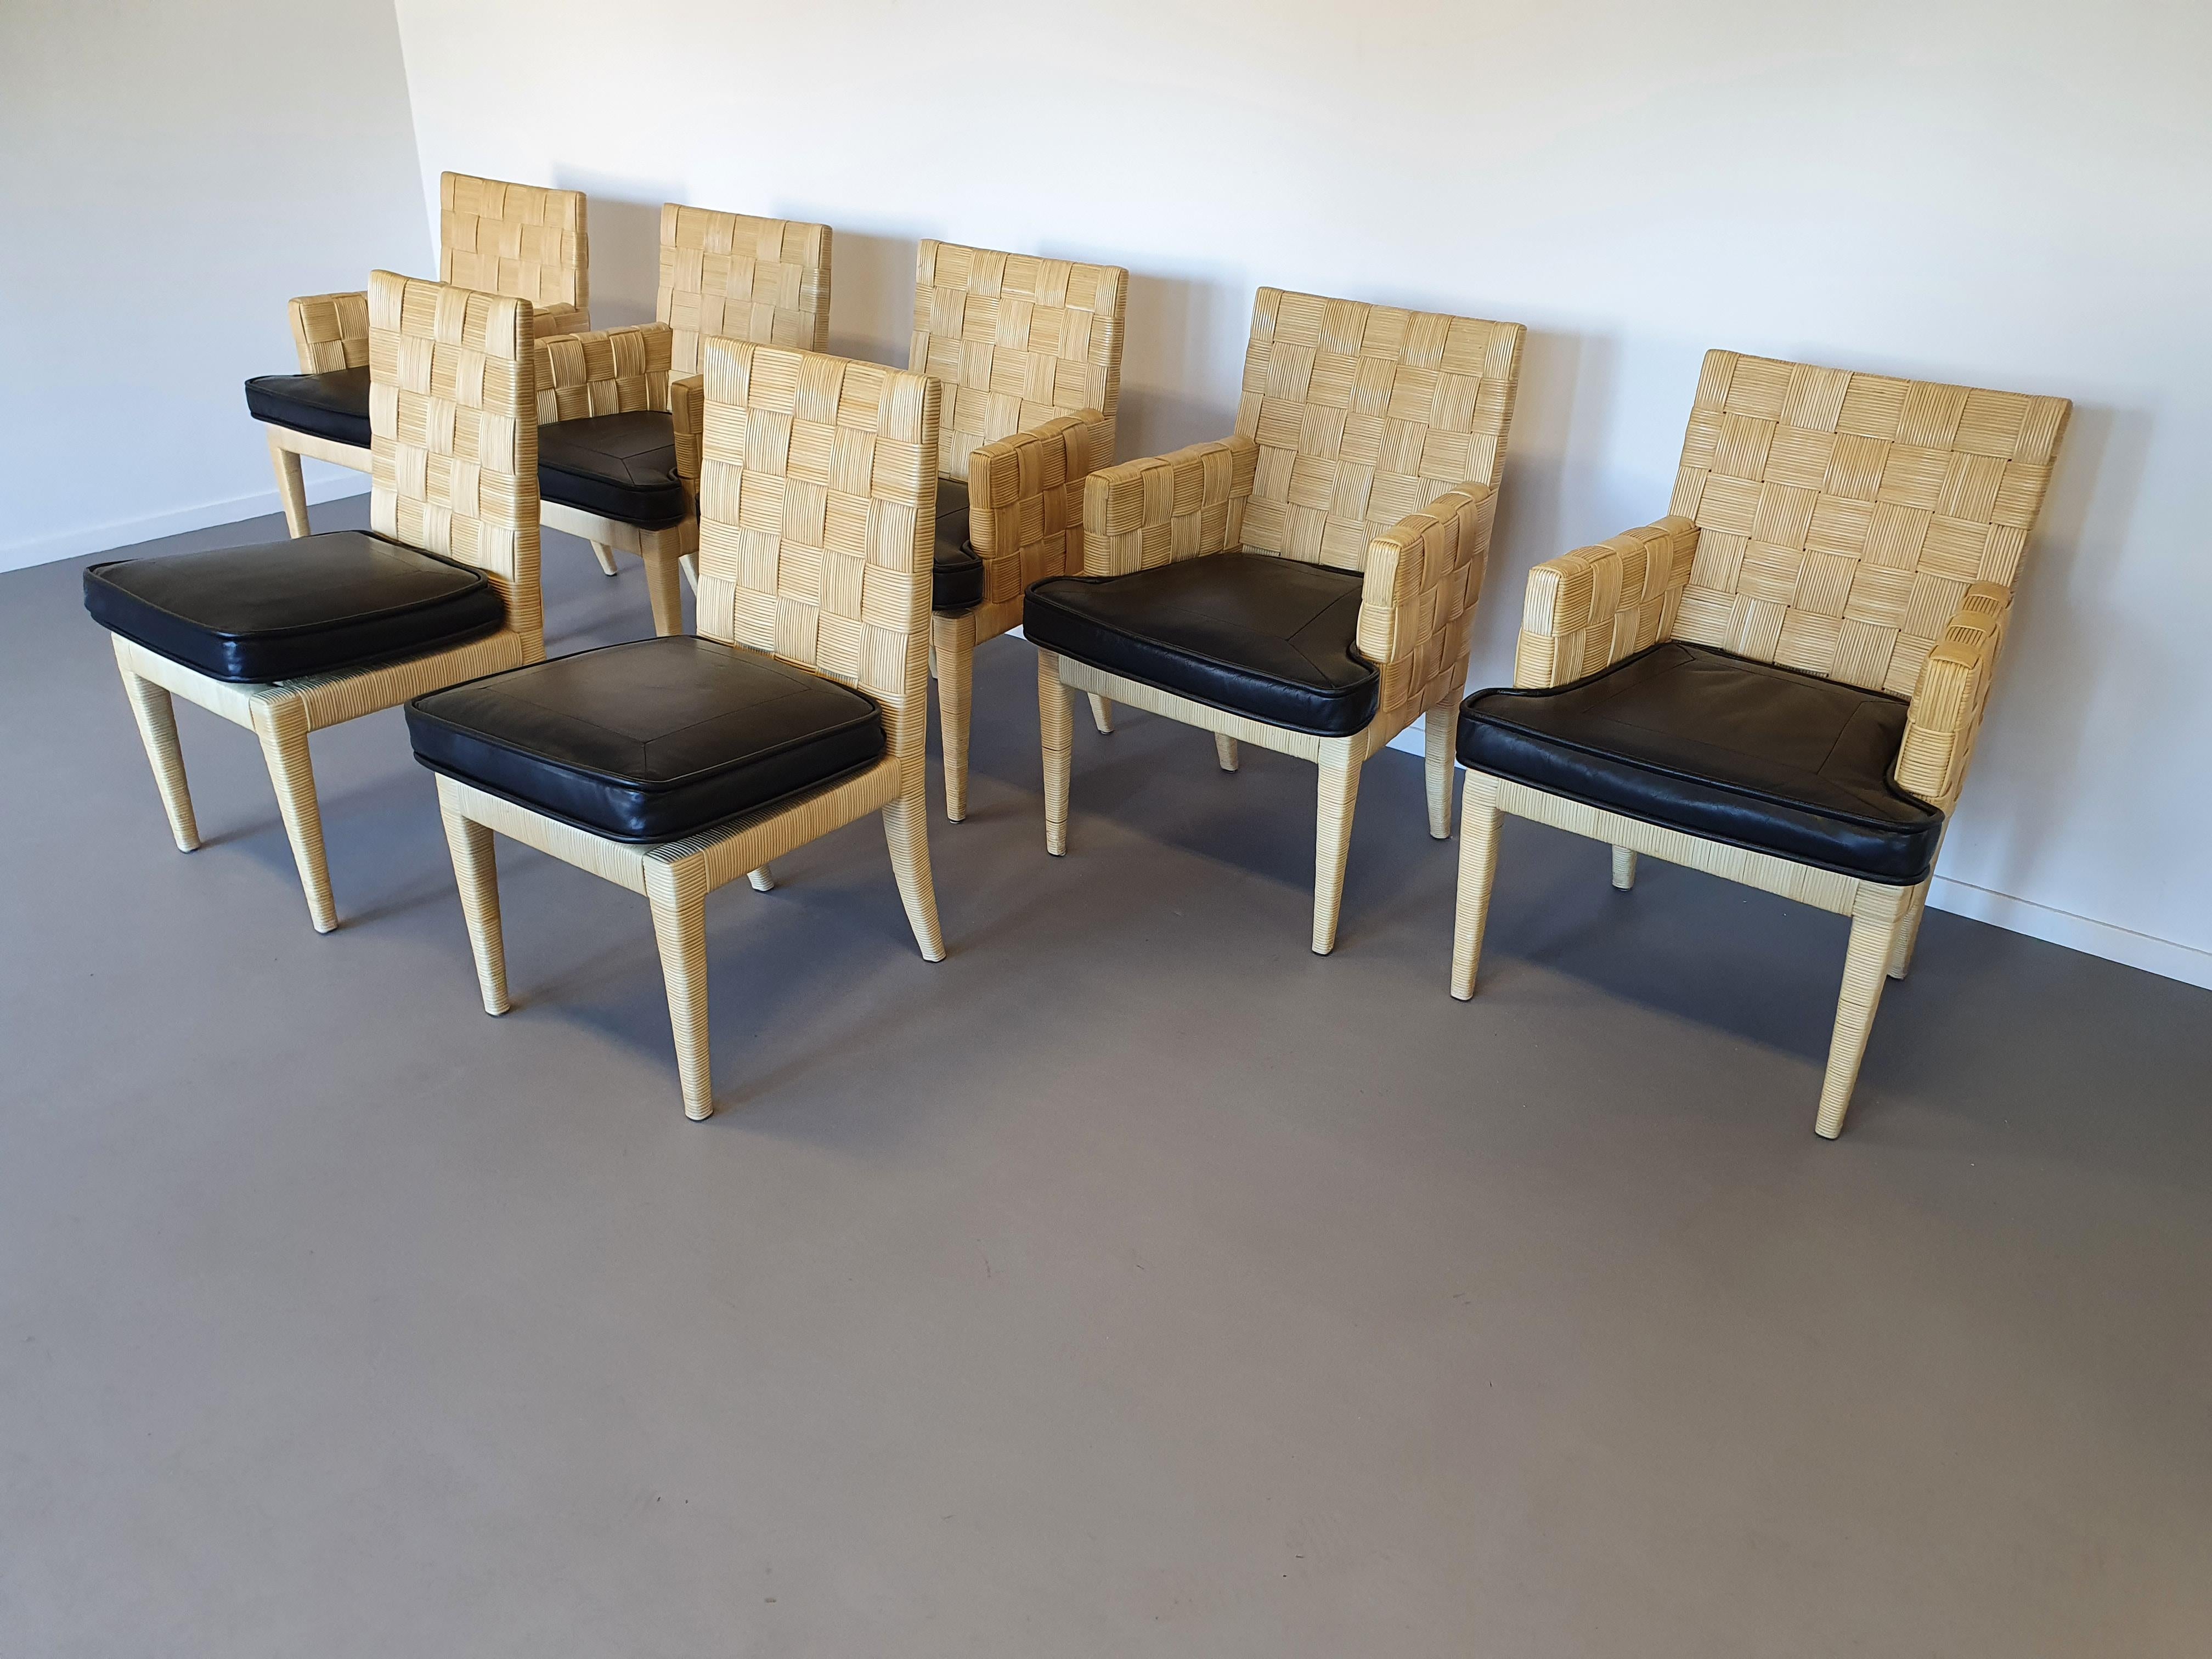 Donghia Block Island chairs 1990s with leather seats. 5 x armrests, 2 x without For Sale 3